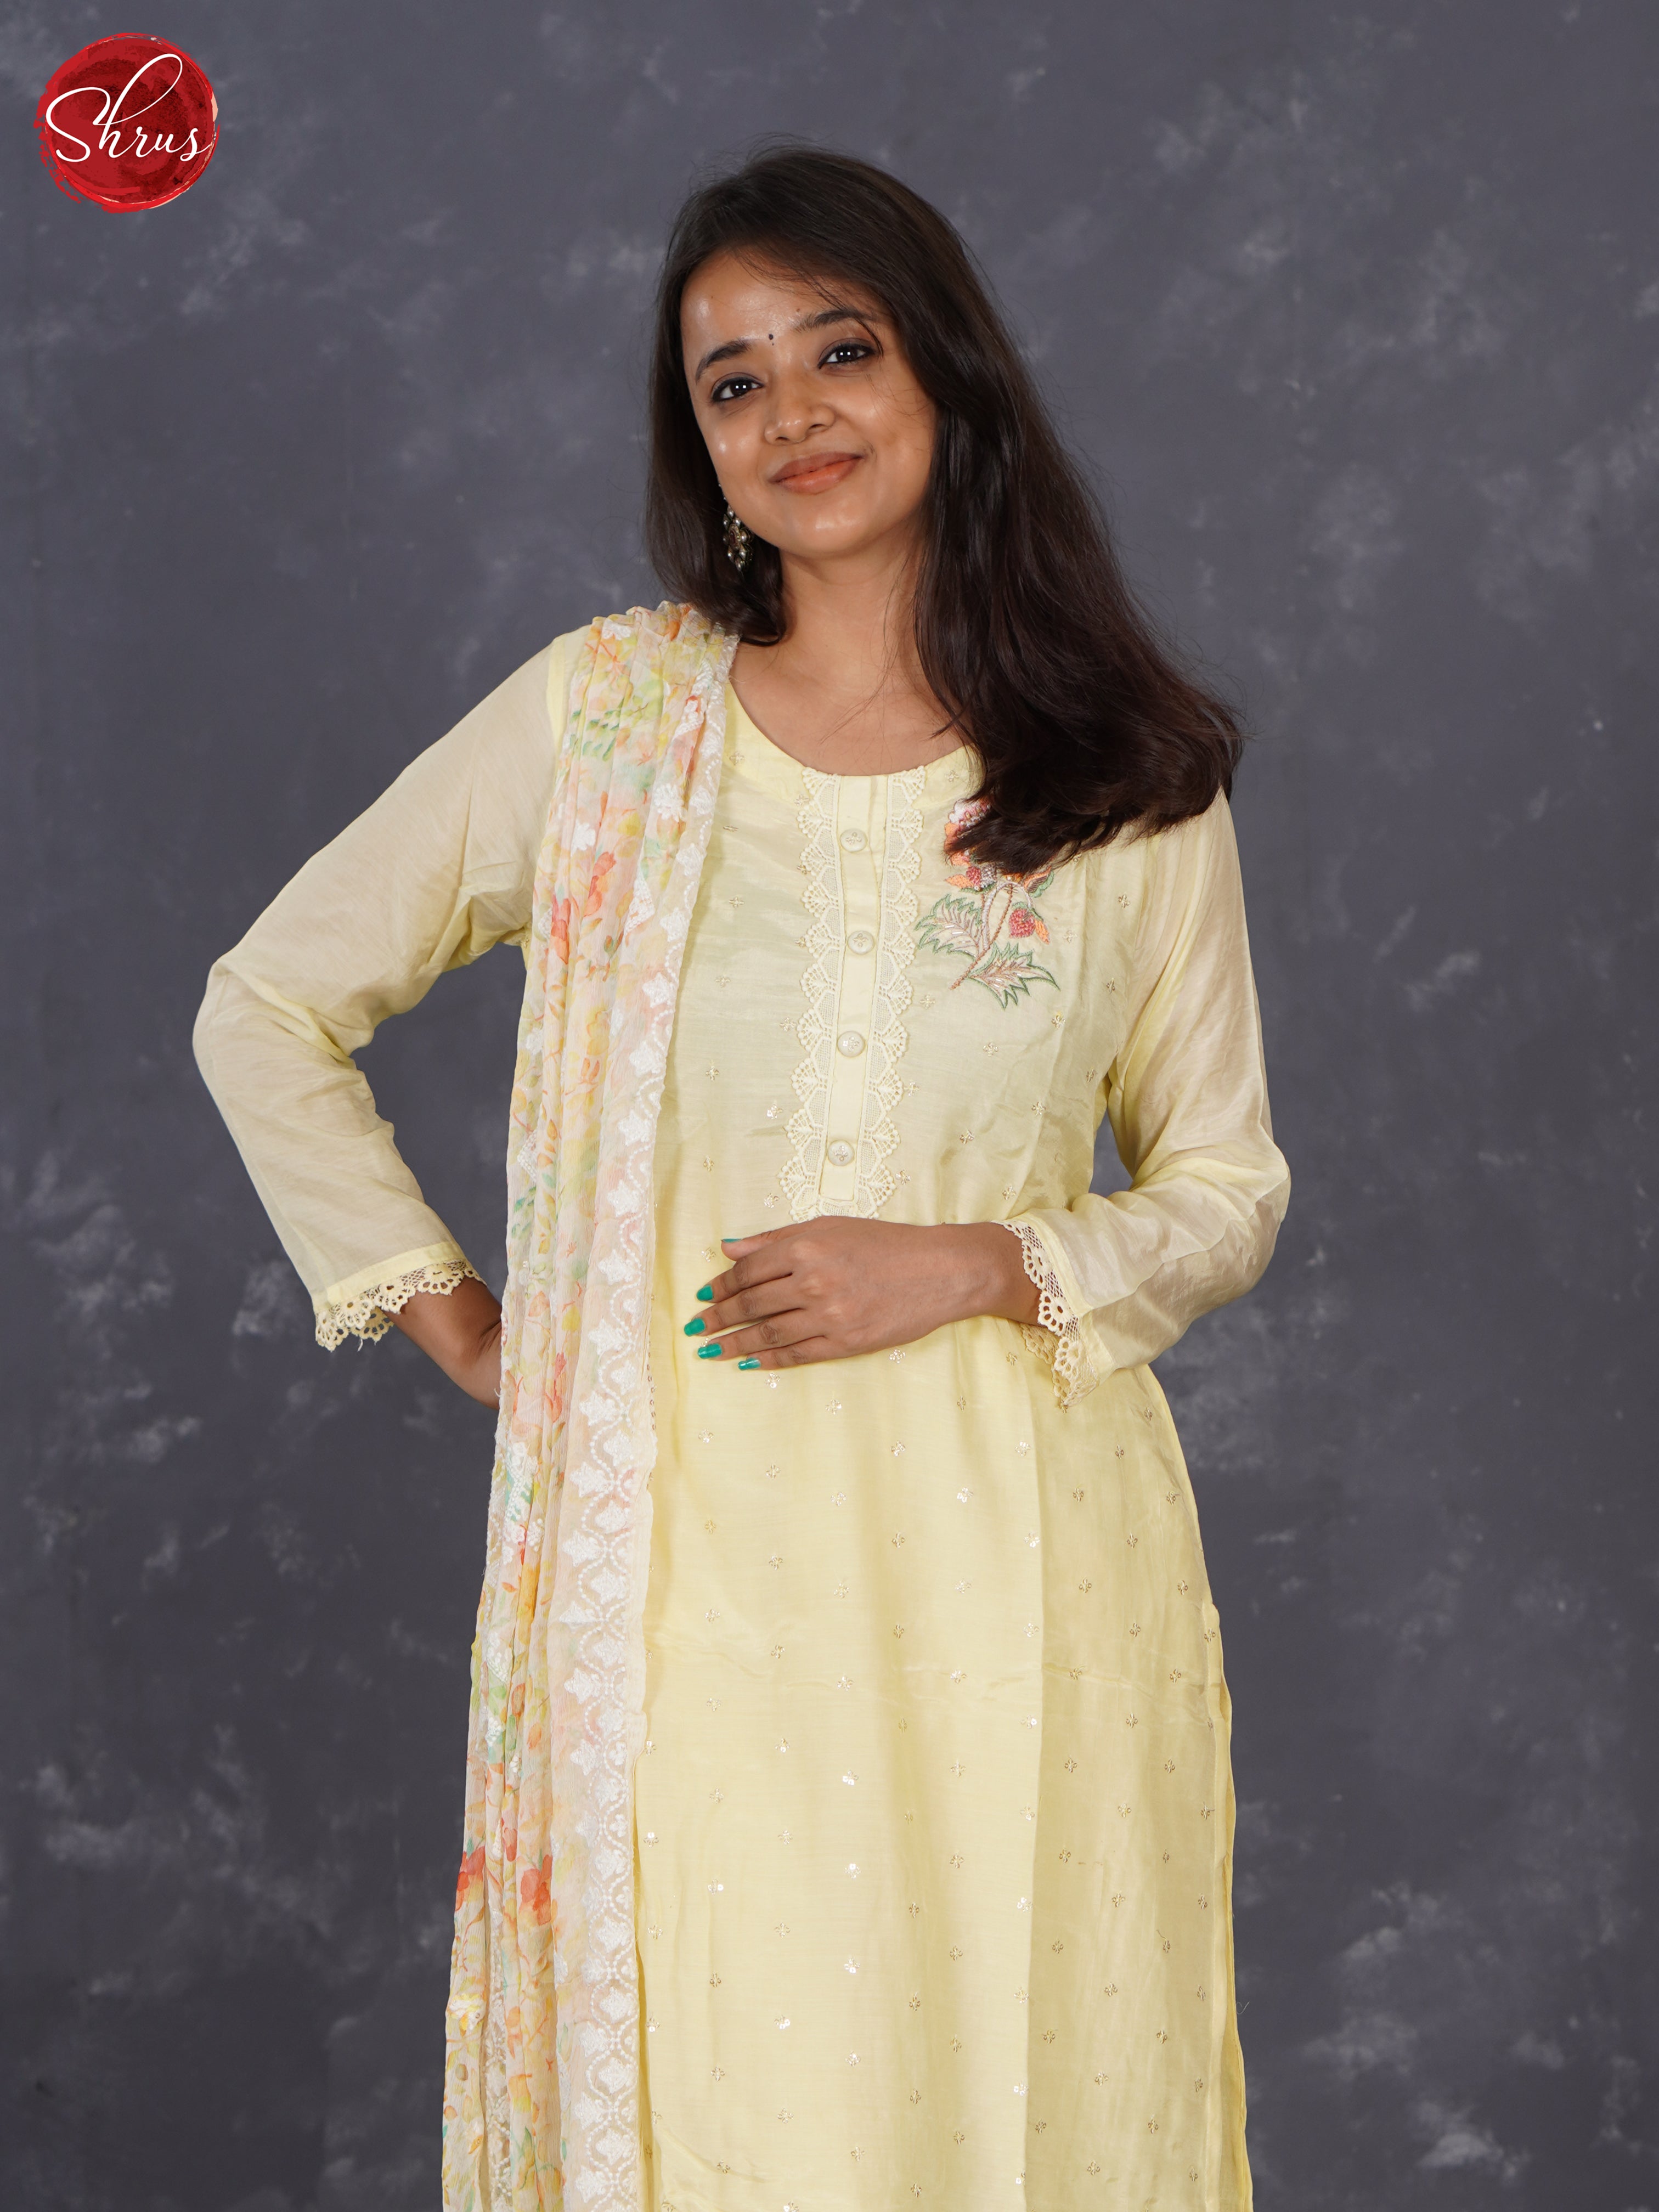 Pale Yellow - Embroidered Printed Silk Top with Organza Dupatta 3 Piece Readymade Salwar - Shop on ShrusEternity.com